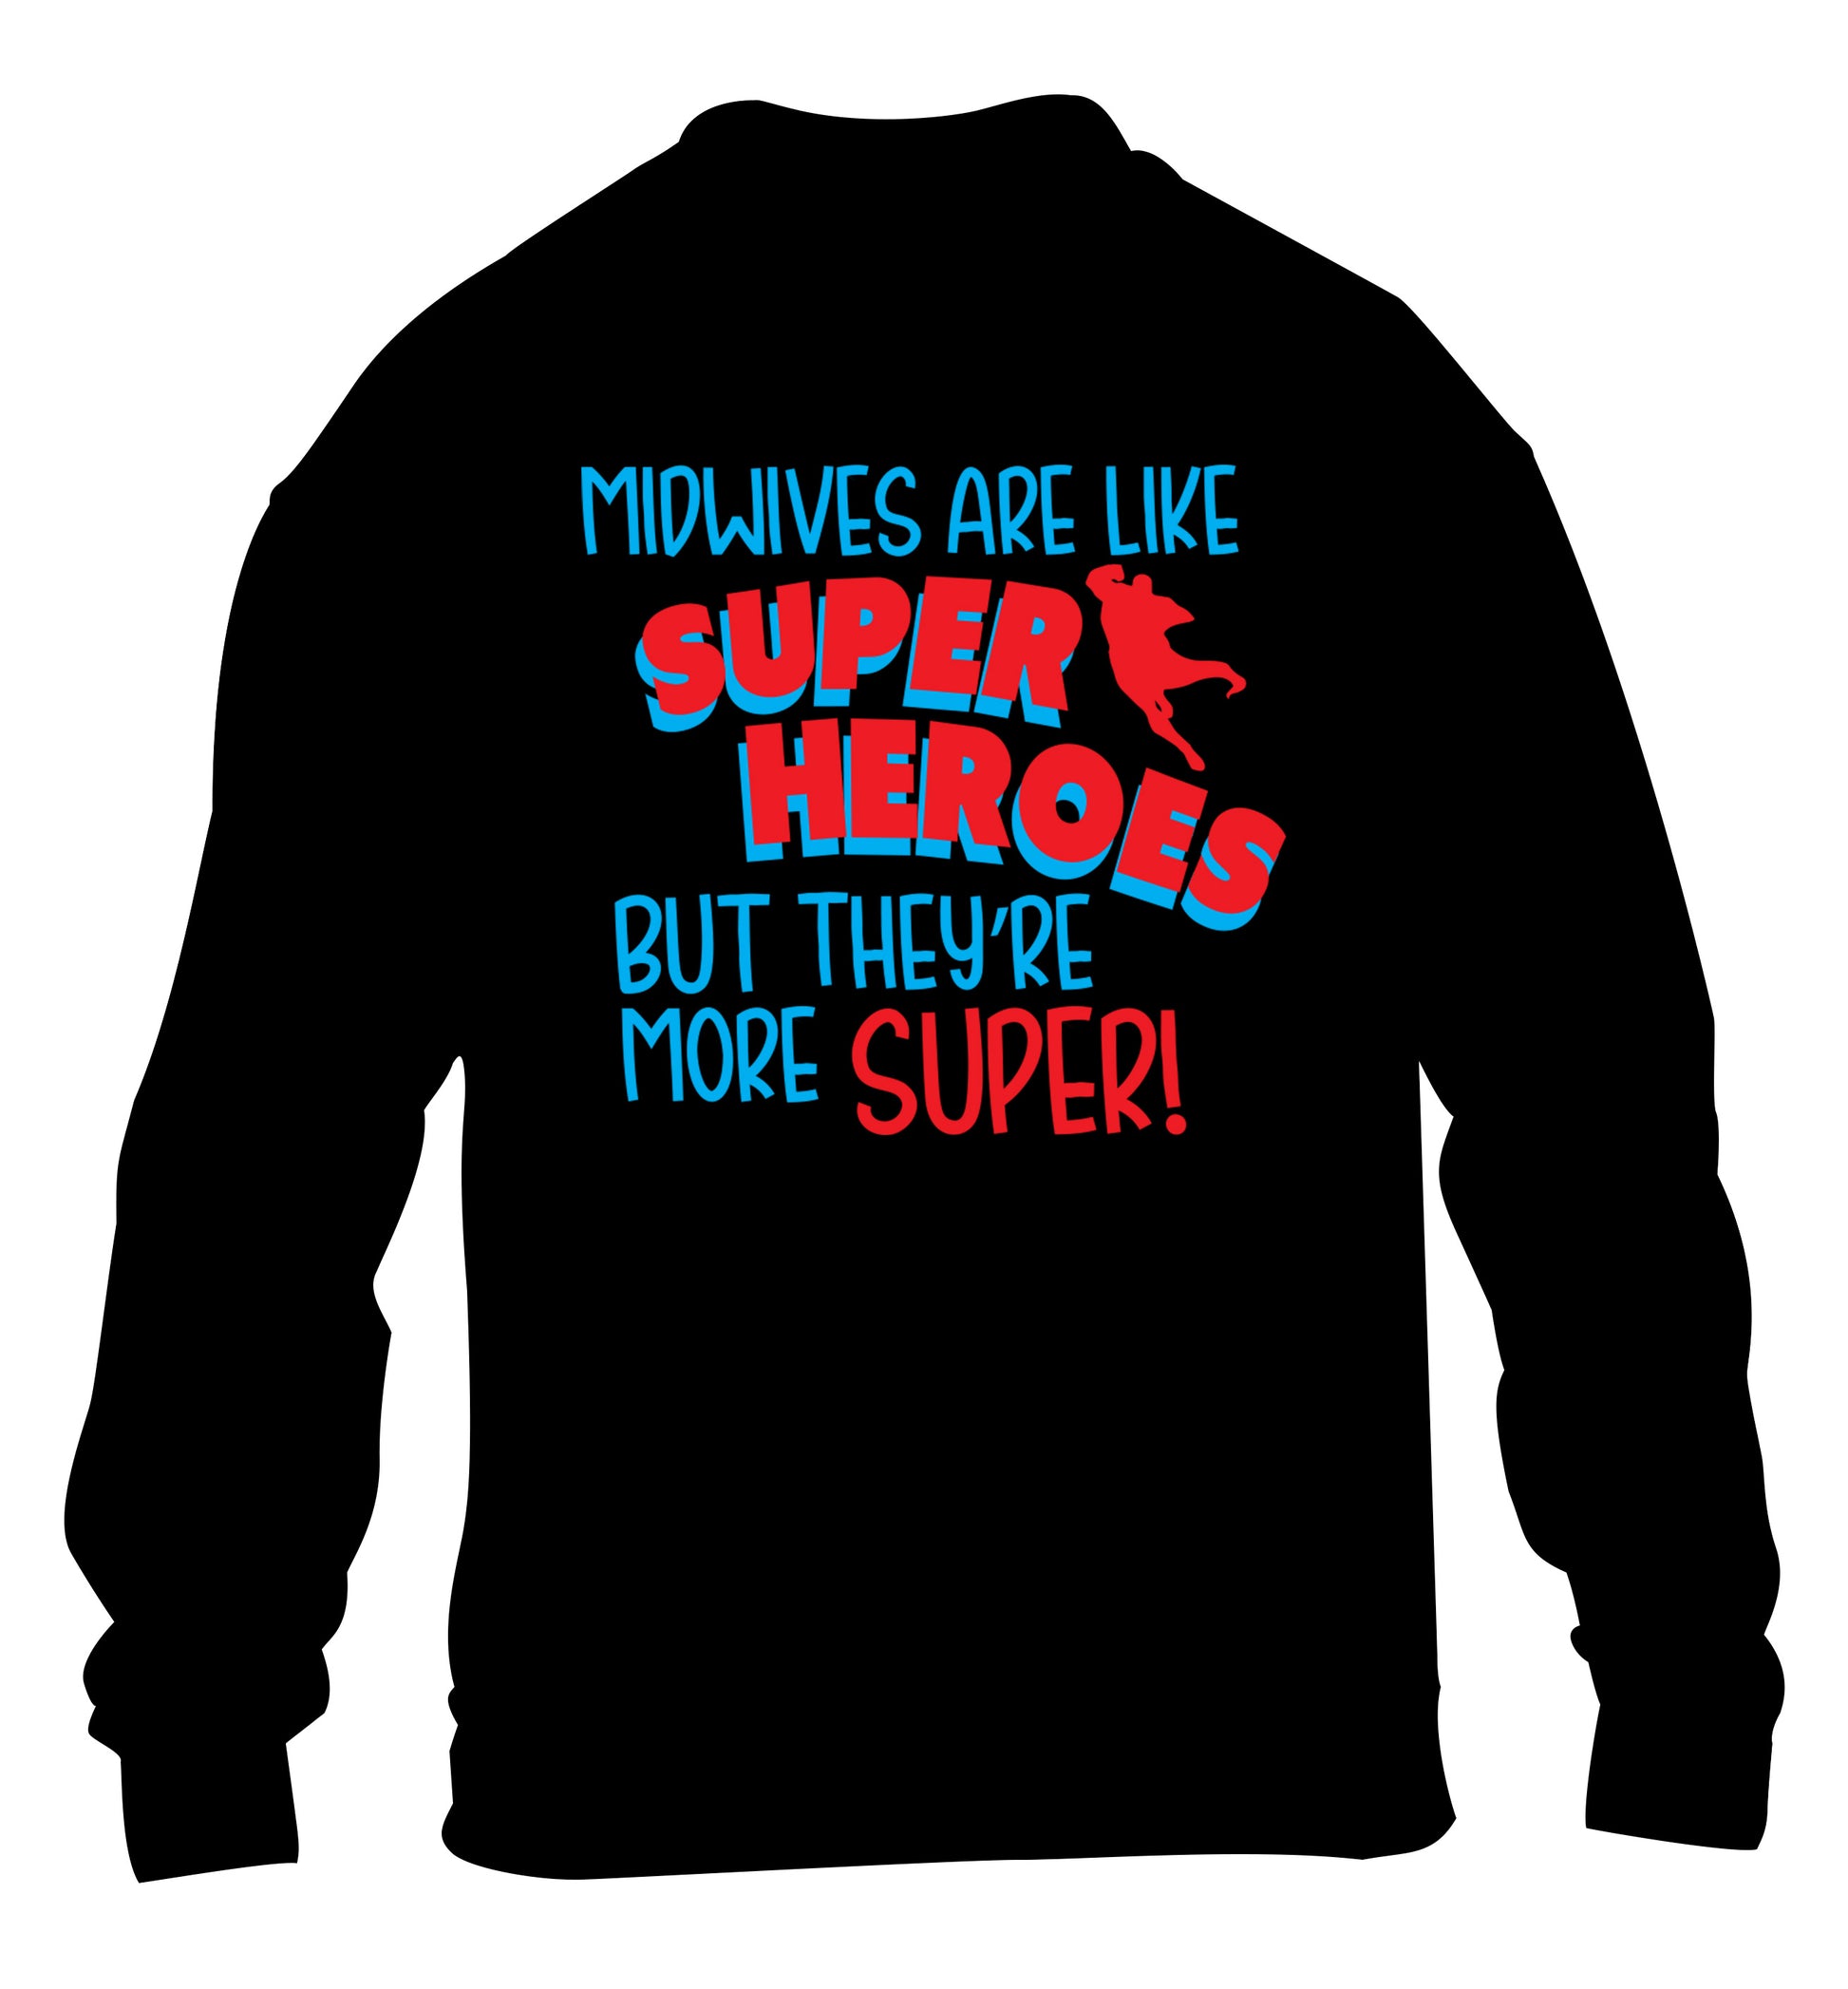 Midwives are like superheros but they're more super children's black sweater 12-13 Years